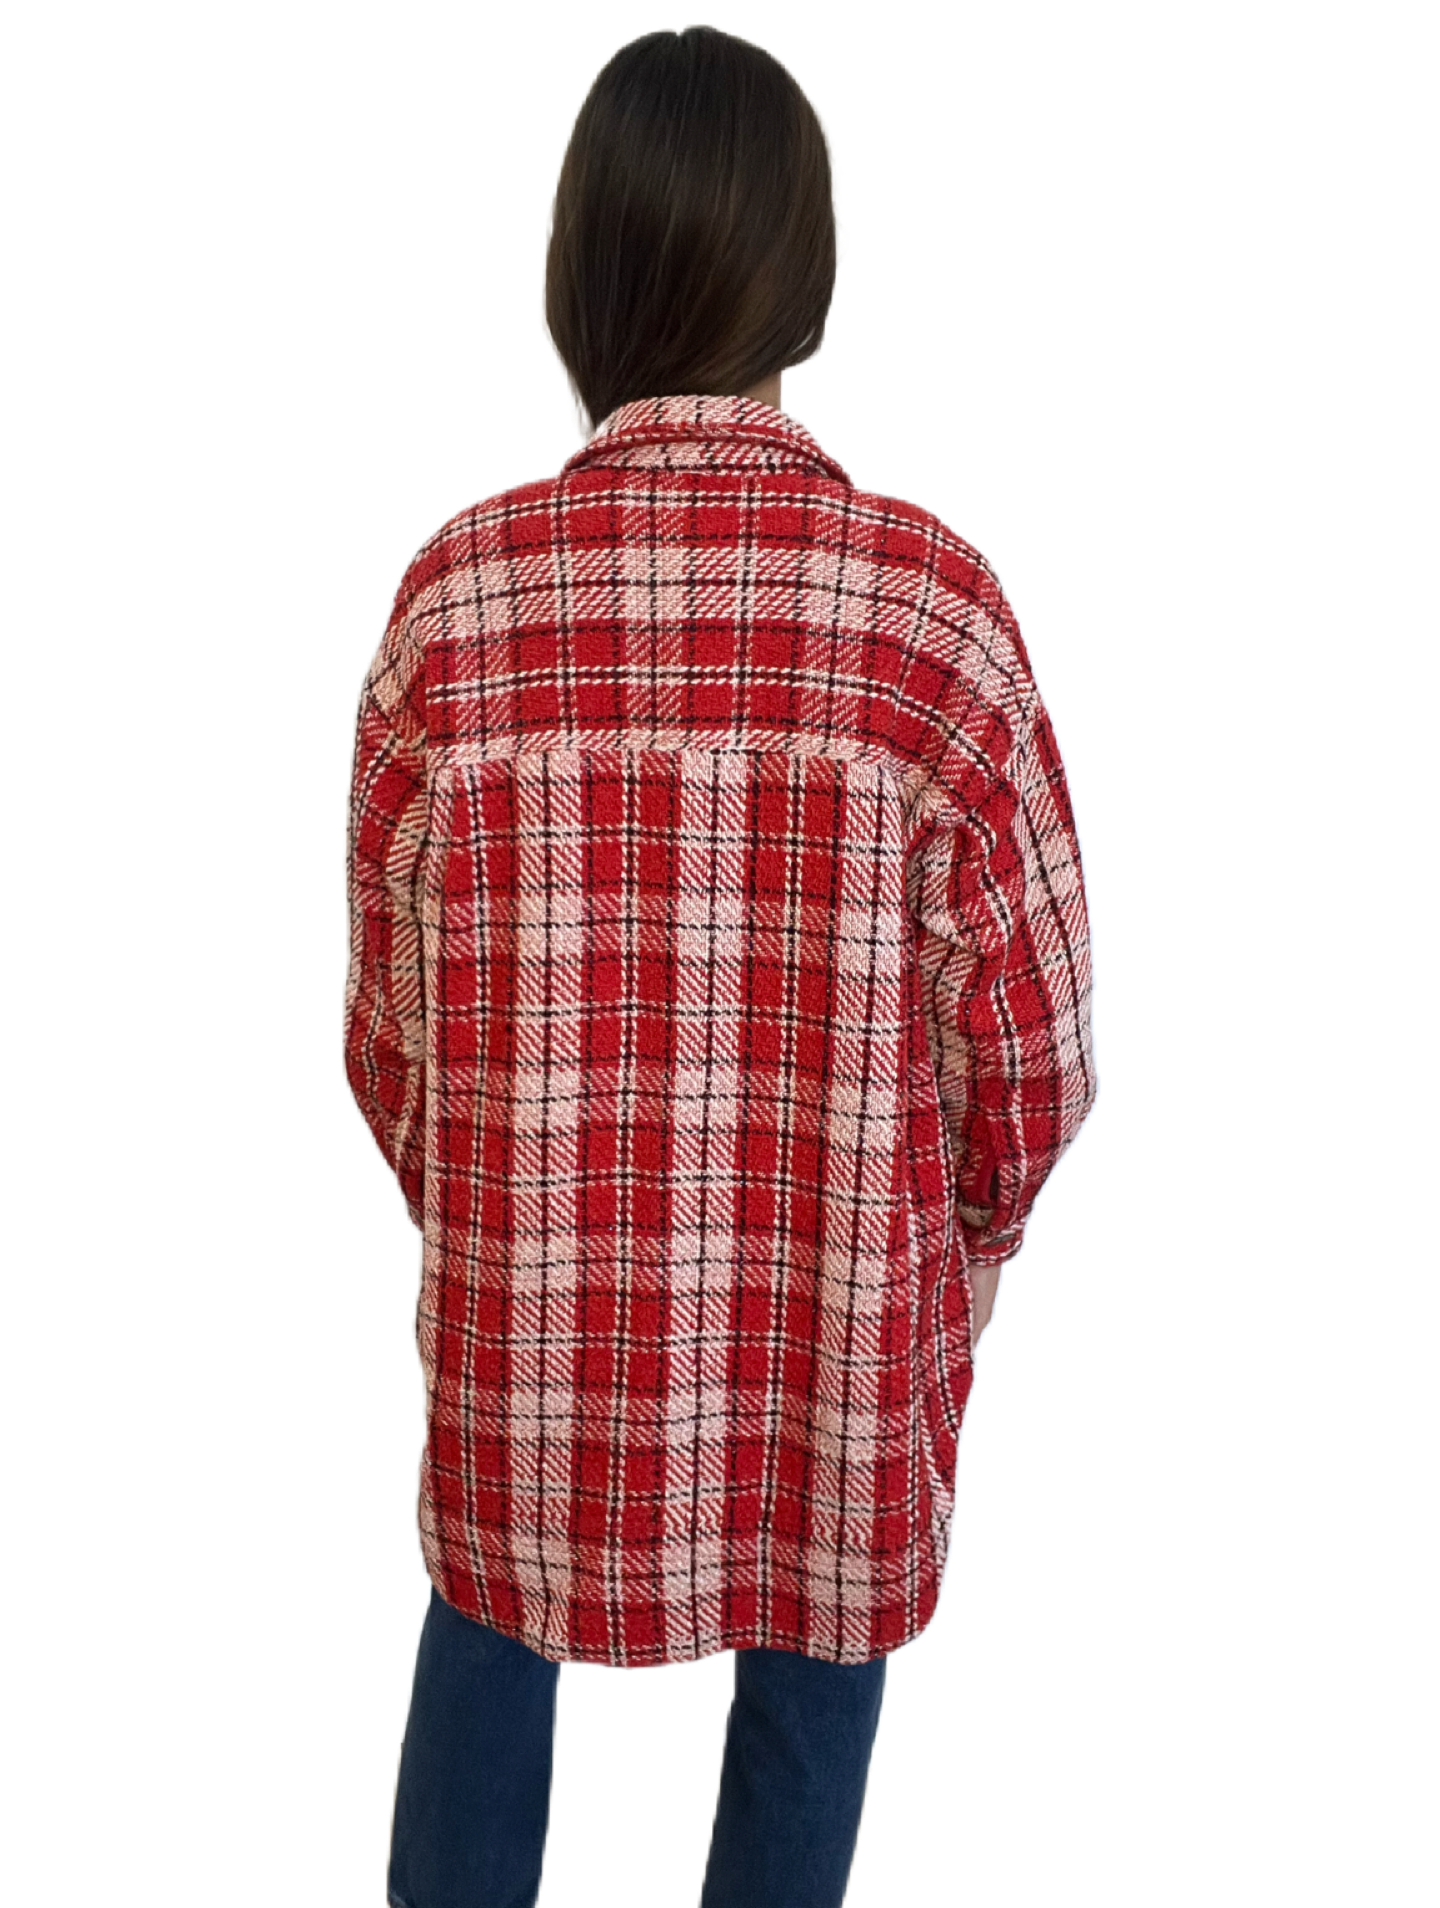 Essential Antwerp Red Checkered Tweed Oversized Over Coat. Size: XS